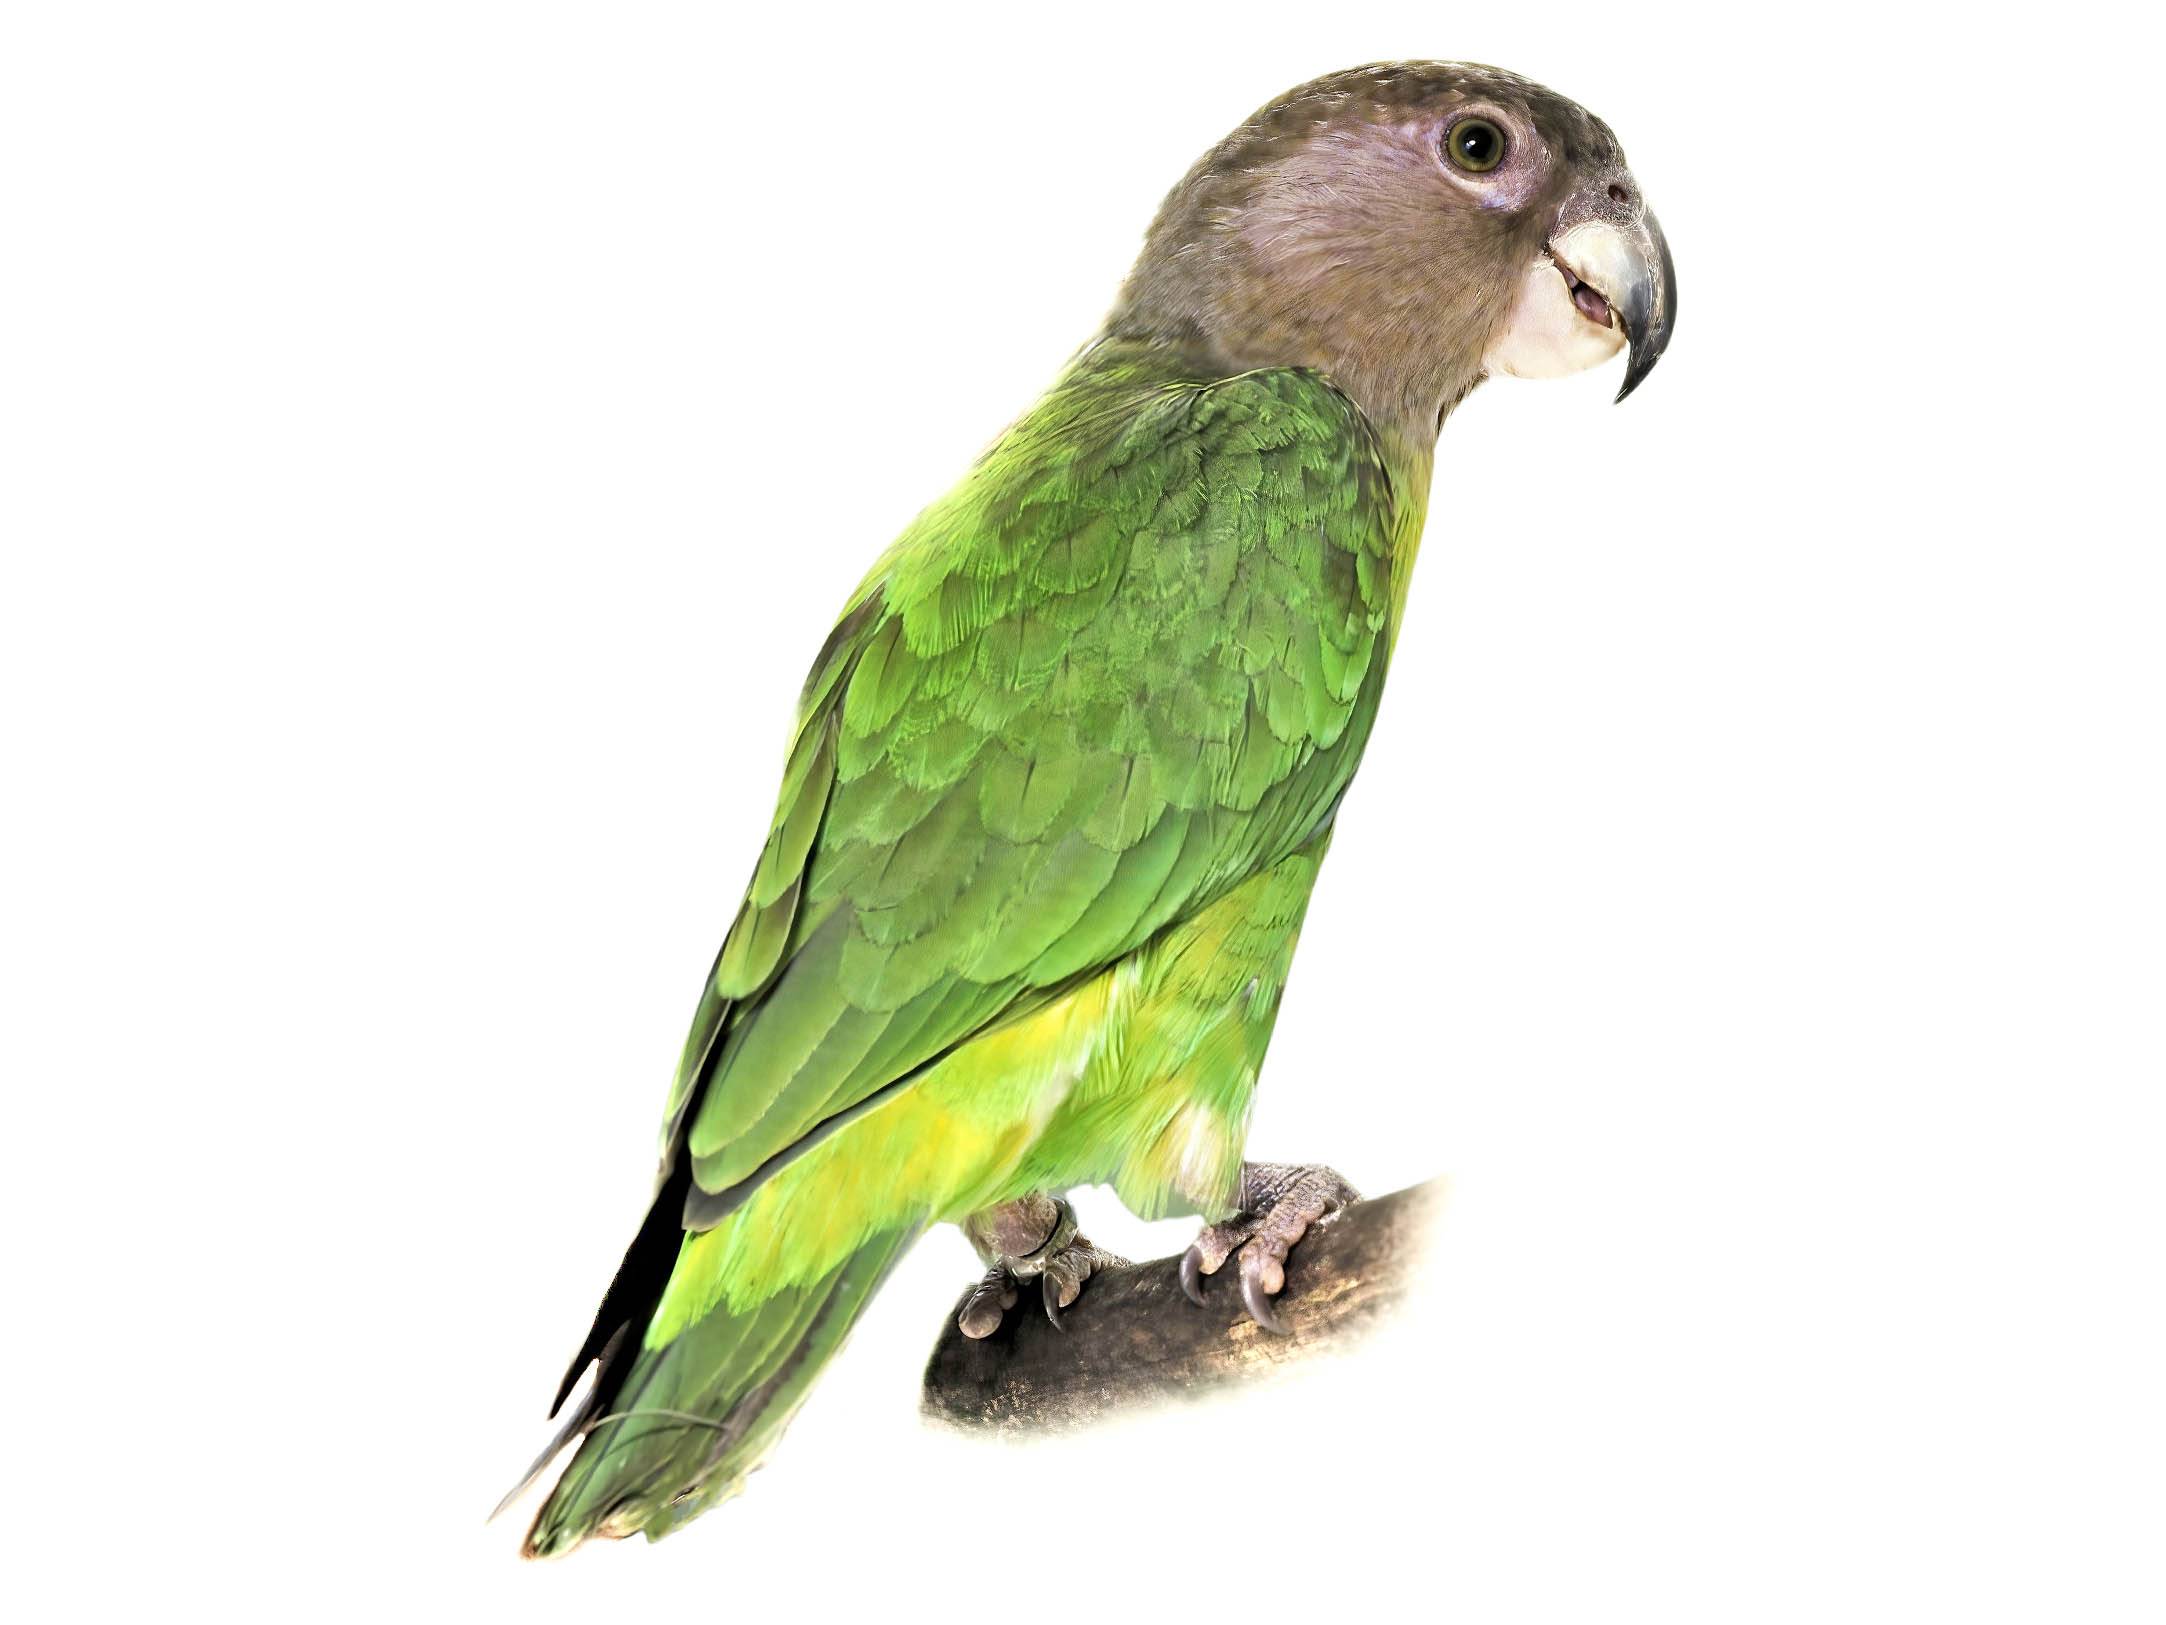 A photo of a Brown-headed Parrot (Poicephalus cryptoxanthus)